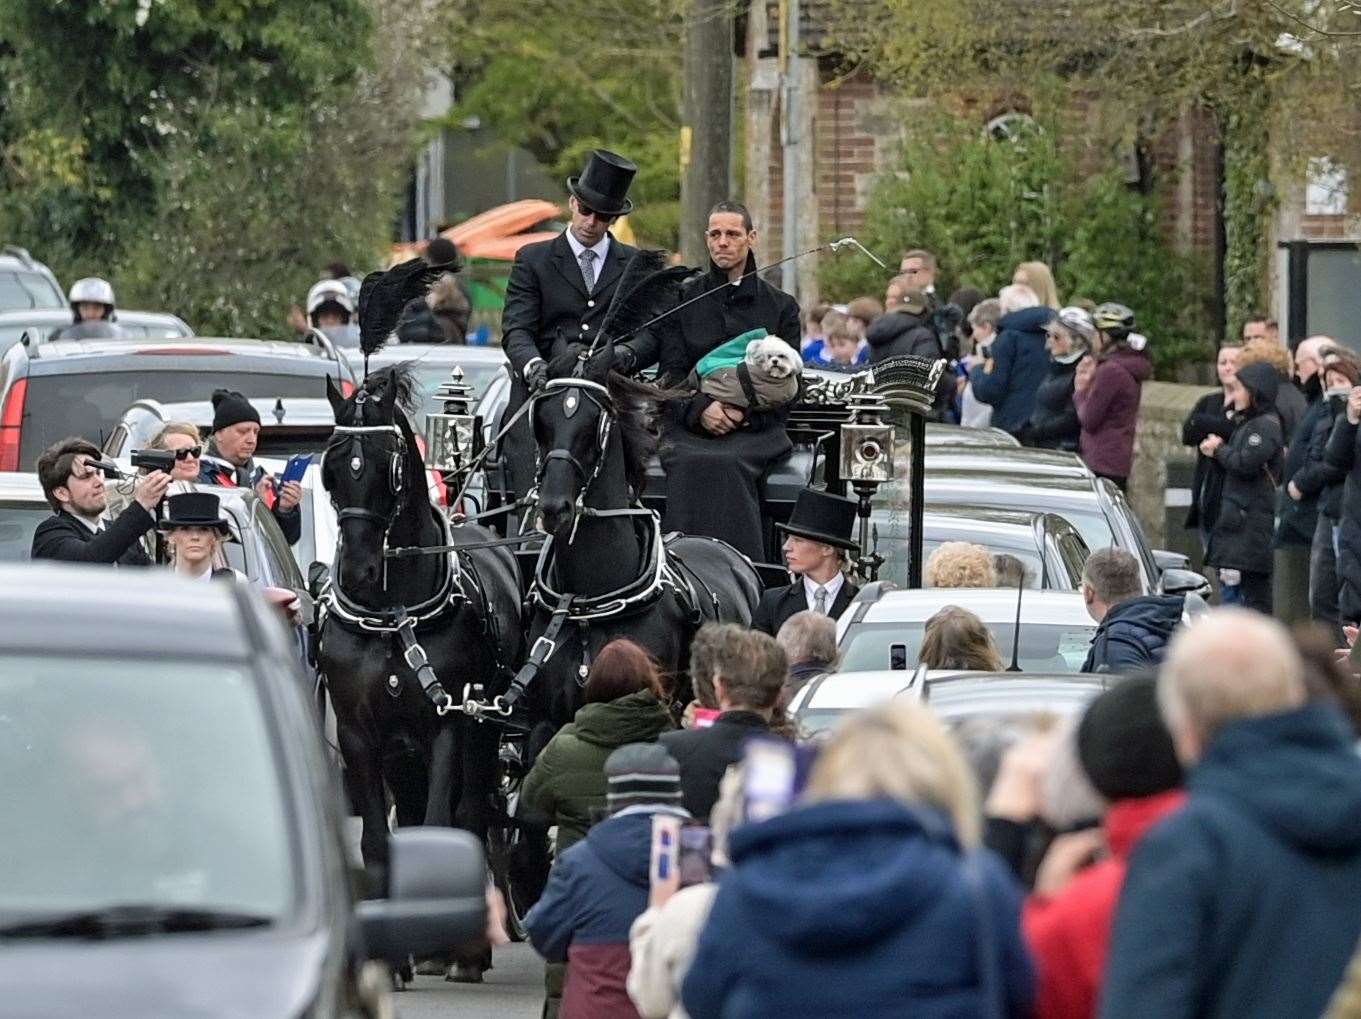 Hundreds of people lined the streets to pay their respects. Picture: Stuart Brock